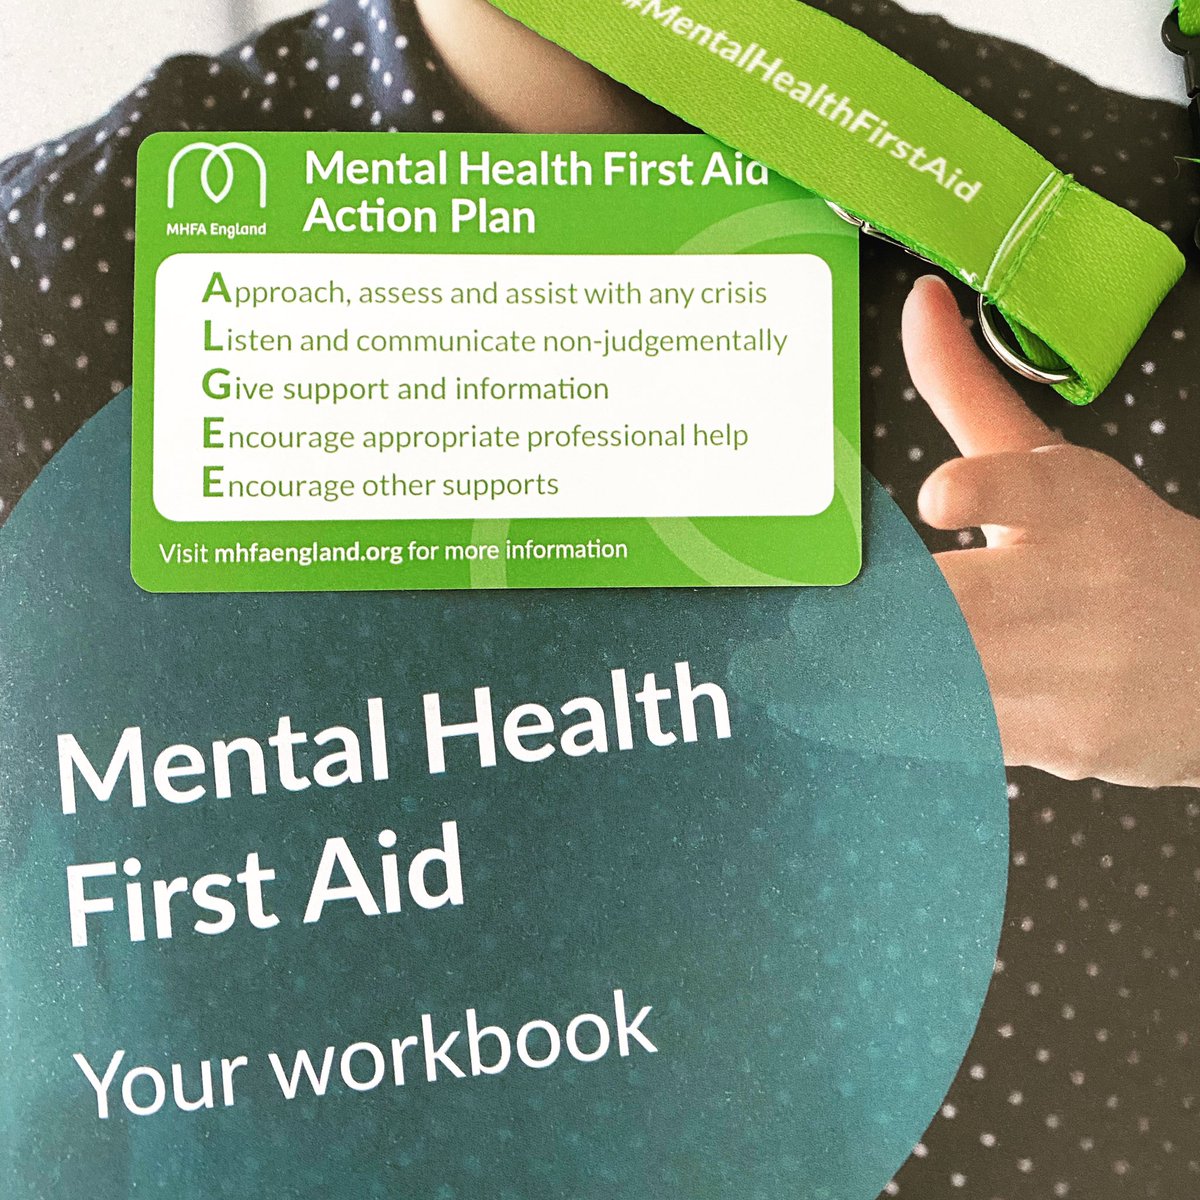 Today I received the workbook for my Mental Health First Aid course. I’m over the moon and grateful for the support I’ve received to be able to conduct this training. 

#MentalHealthFirstAid @MHFAEngland